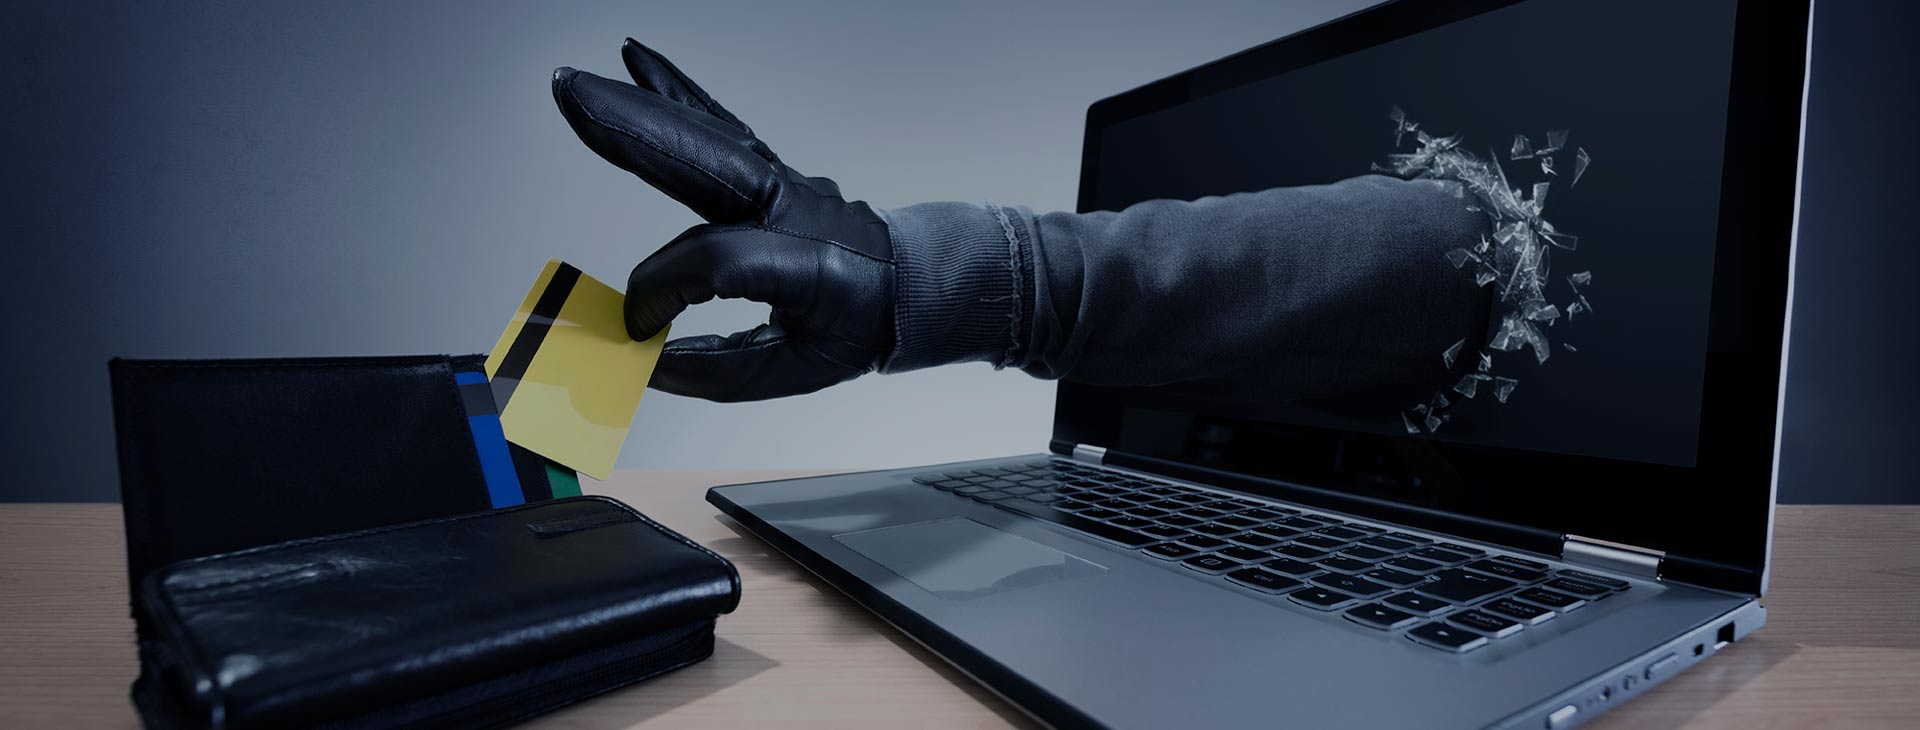 What You Need to Know About Data Theft